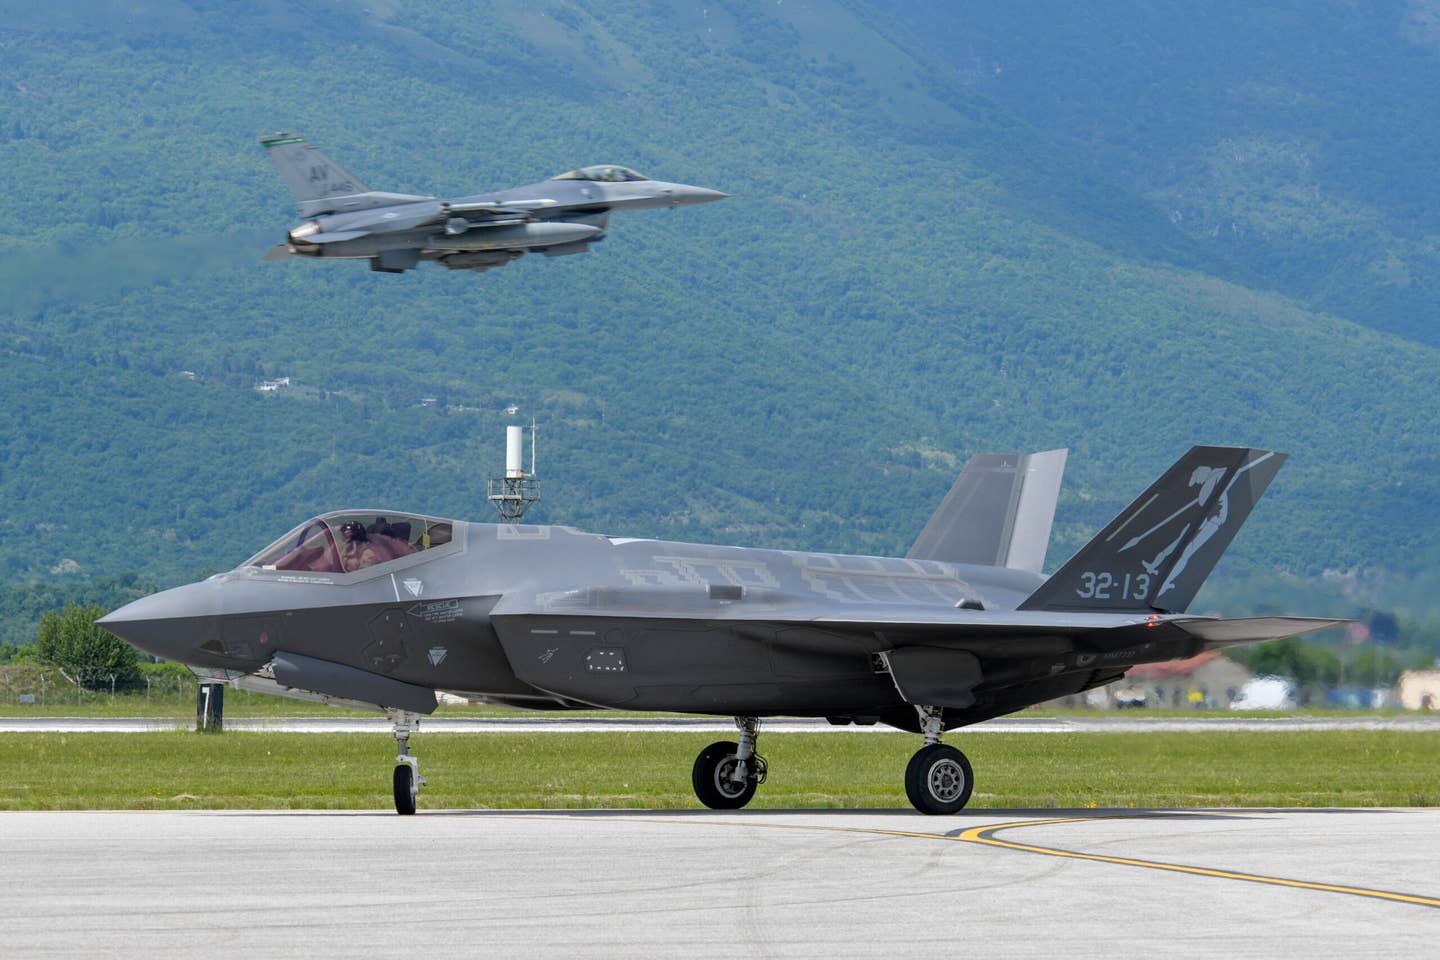 An Italian Air Force F-35A taxis while a U.S. Air Force F-16 Fighting Falcon takes off during a joint exercise at Aviano Air Base, Italy, May 21, 2021. <em>U.S. Air Force photo by Airman 1st Class Brooke Moeder</em><br>